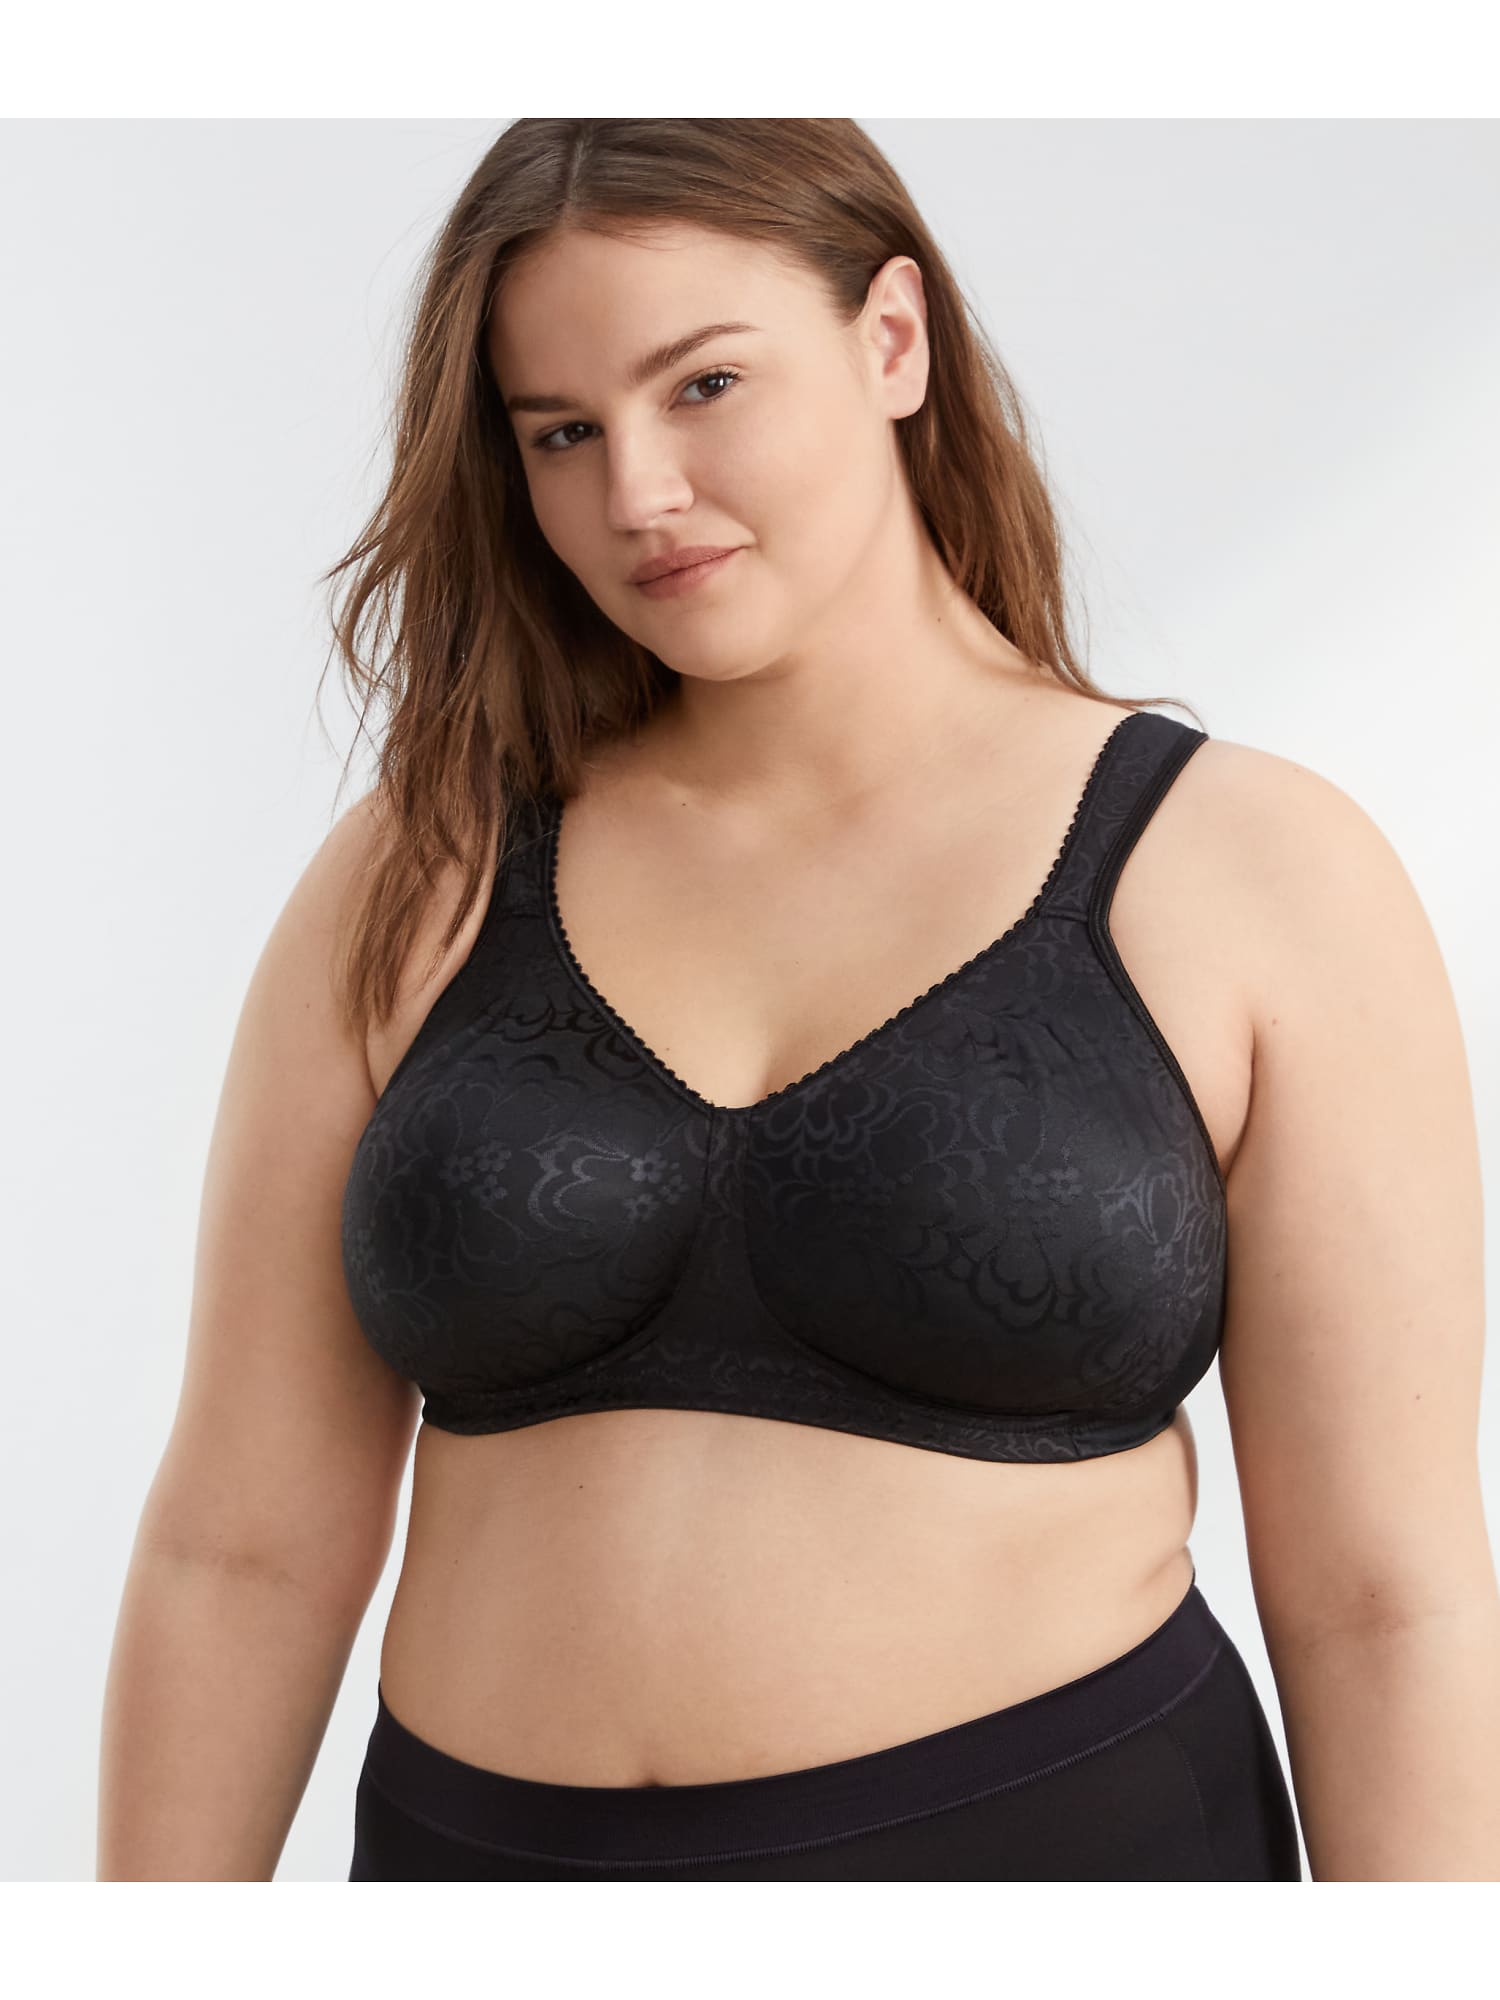 Playtex Women's 18 Hour Ultimate Lift and Support Wire Black Size 46dd G3  for sale online